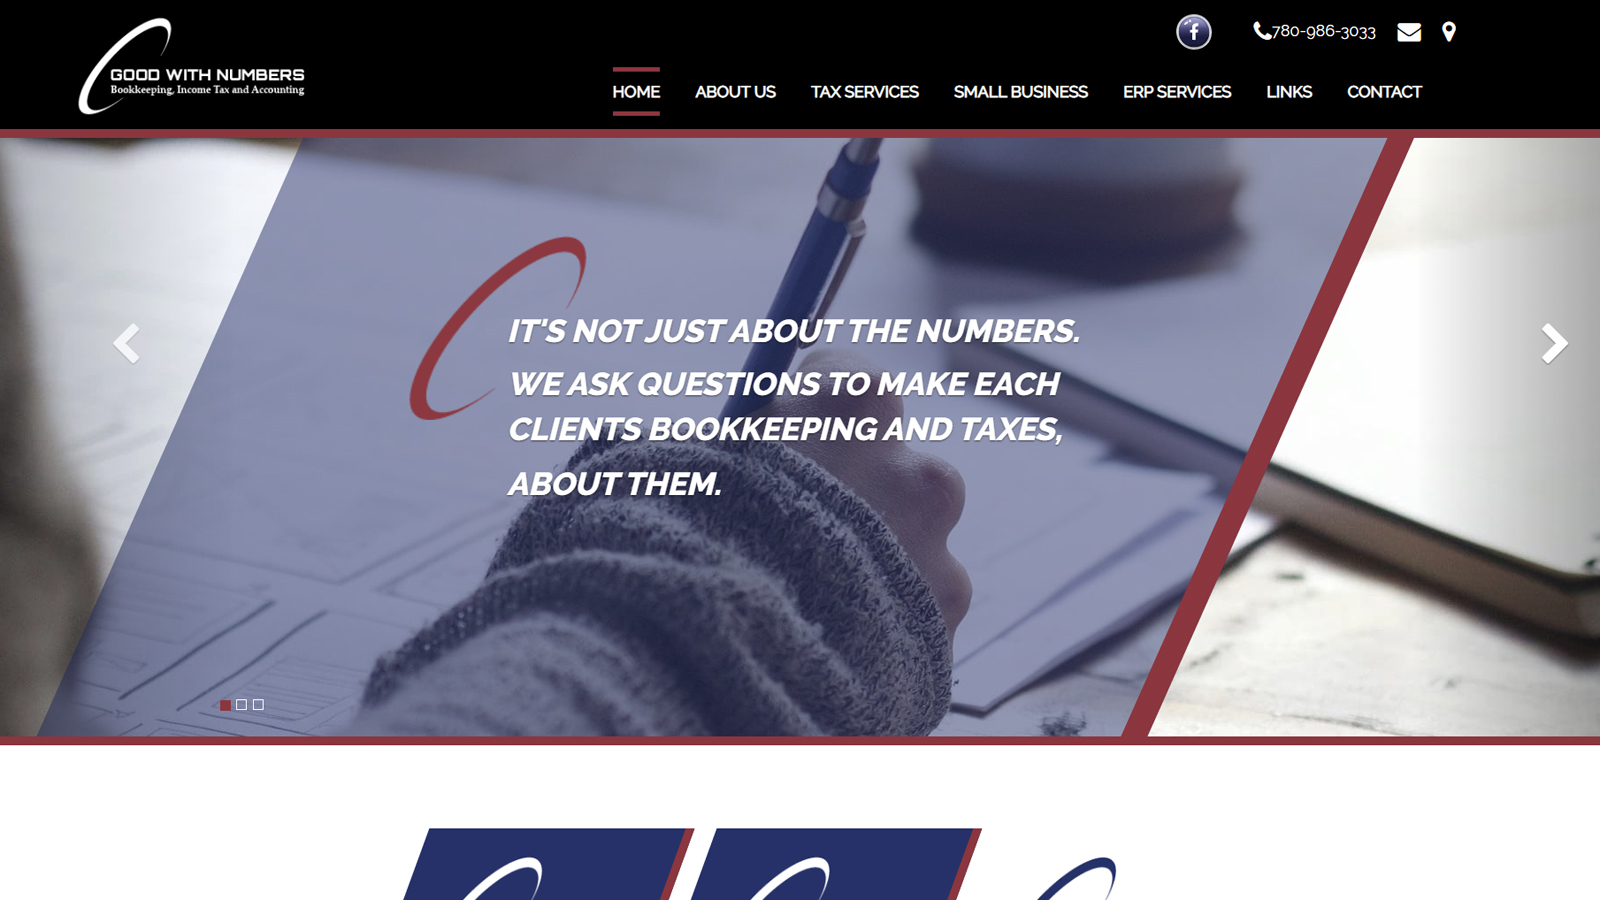 Good With Numbers home page - website designed by Industrial NetMedia/Creative101